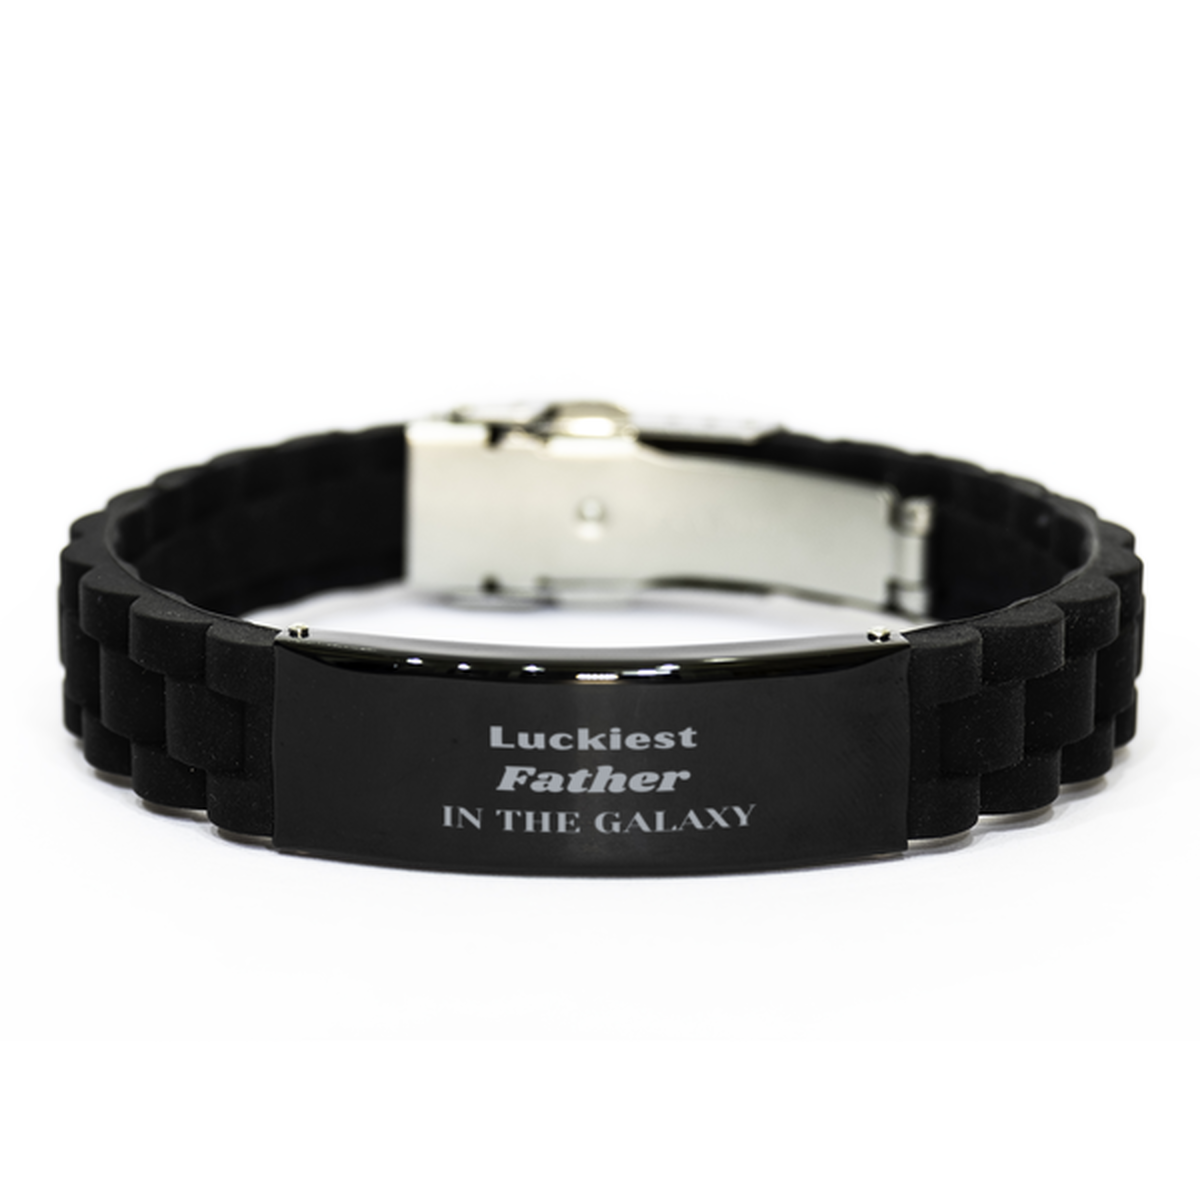 Luckiest Father in the Galaxy, To My Father Engraved Gifts, Christmas Father Black Glidelock Clasp Bracelet Gifts, X-mas Birthday Unique Gifts For Father Men Women